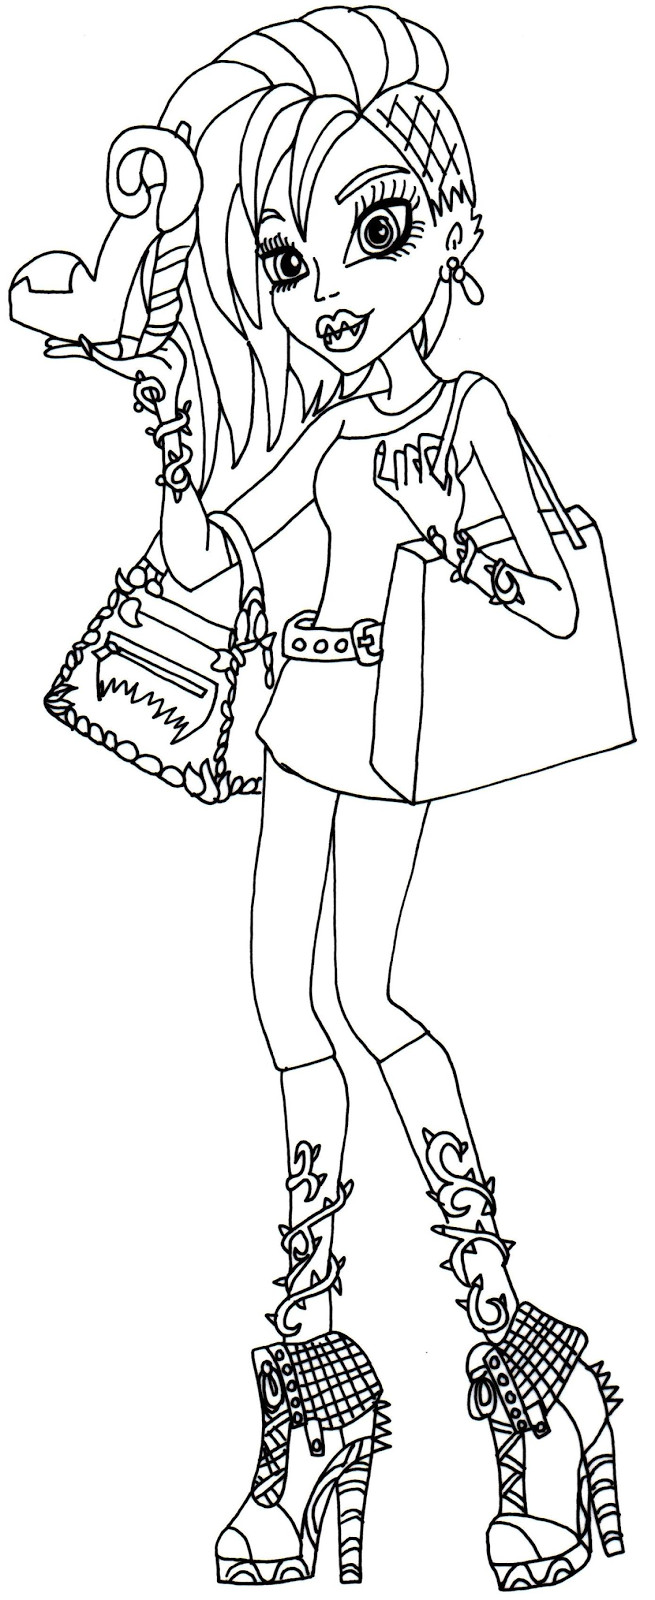 Free Printable Coloring Sheets Monster High
 Free Printable Monster High Coloring Pages April 2014